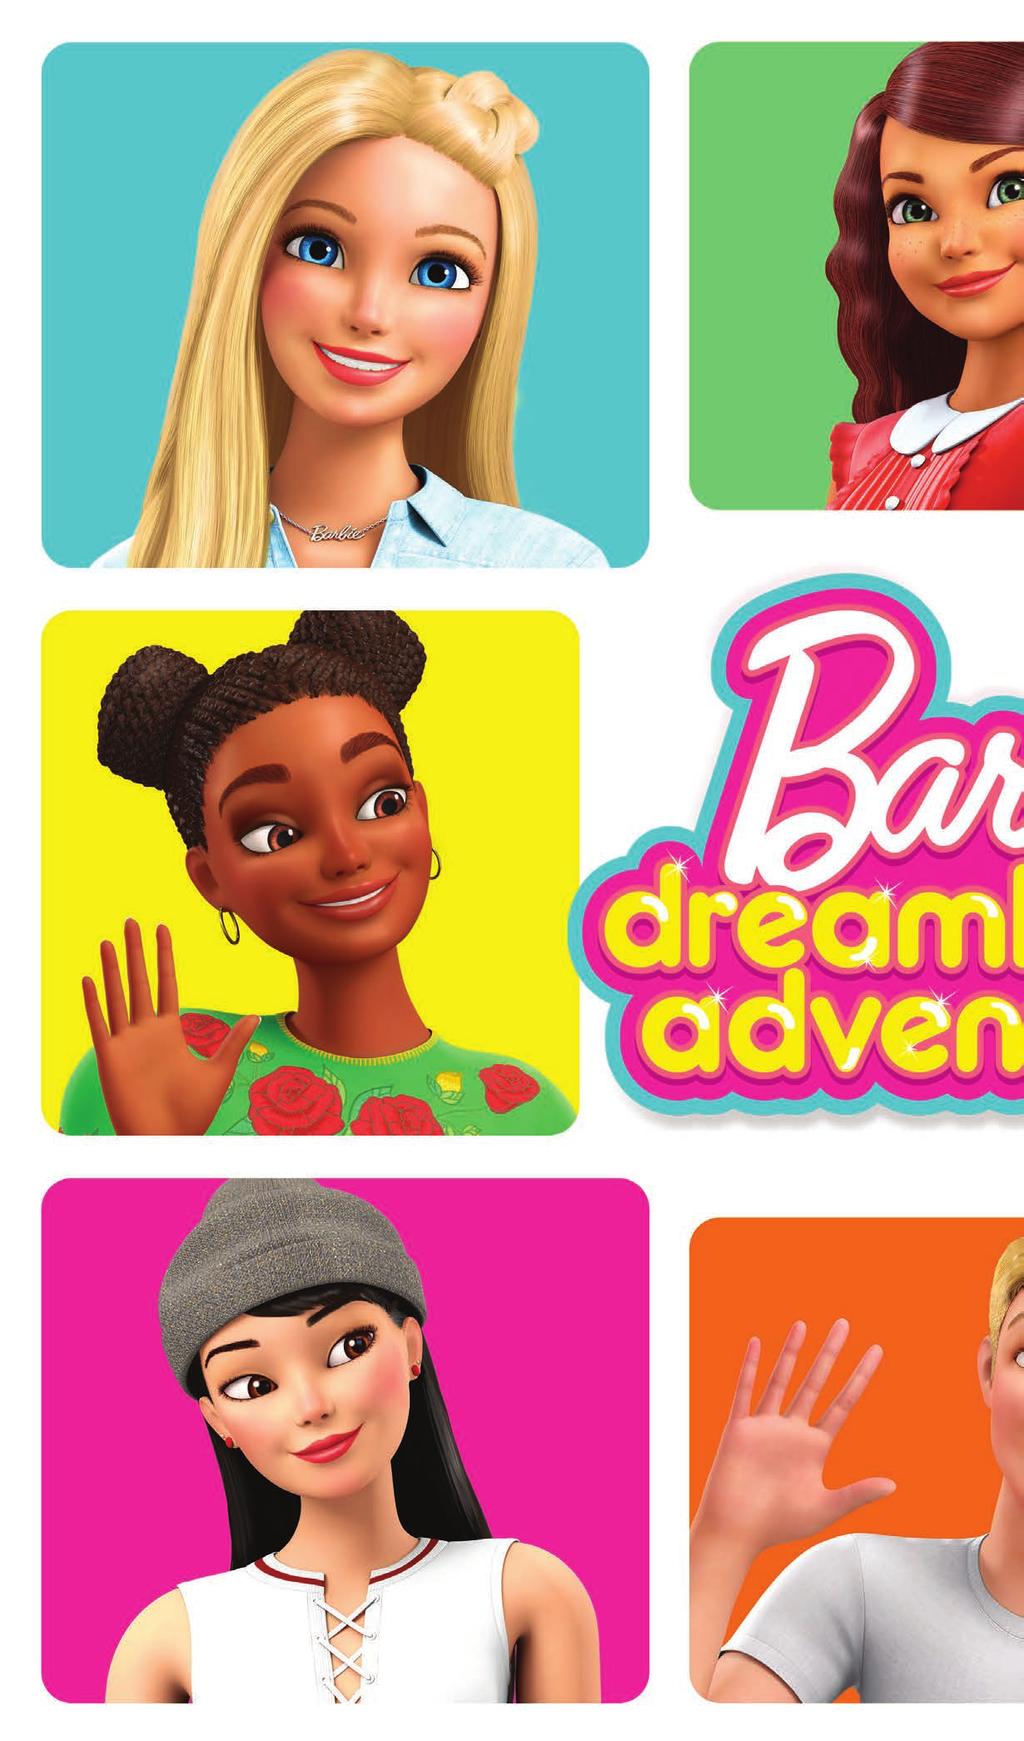 2019 Mattel. BARBIE and associated trademarks and trade press are owned by,  and used under license from, Mattel. - PDF Ingyenes letöltés